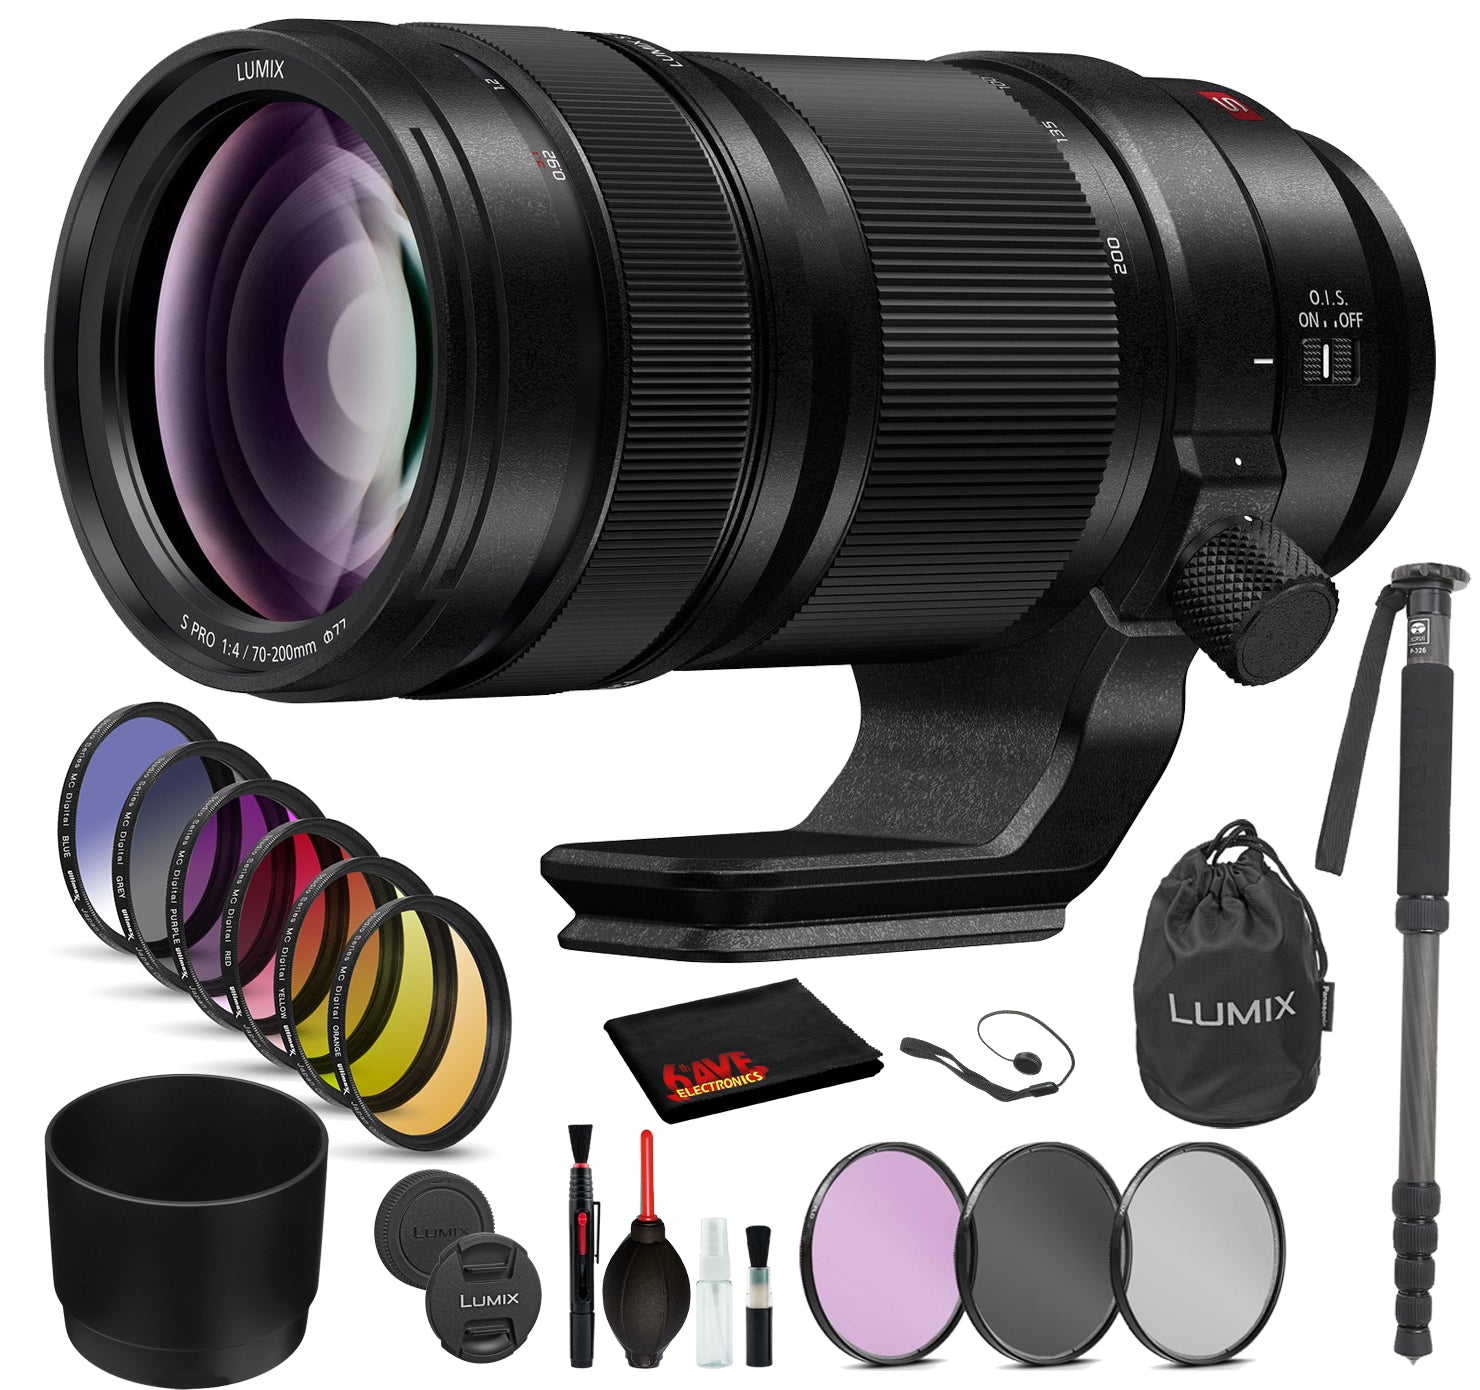 Panasonic Lumix S PRO 70-200mm f/4 O.I.S. Lens with: Sandisk Extreme Pro 64GB SD Card, 9PC Filter Kit + More